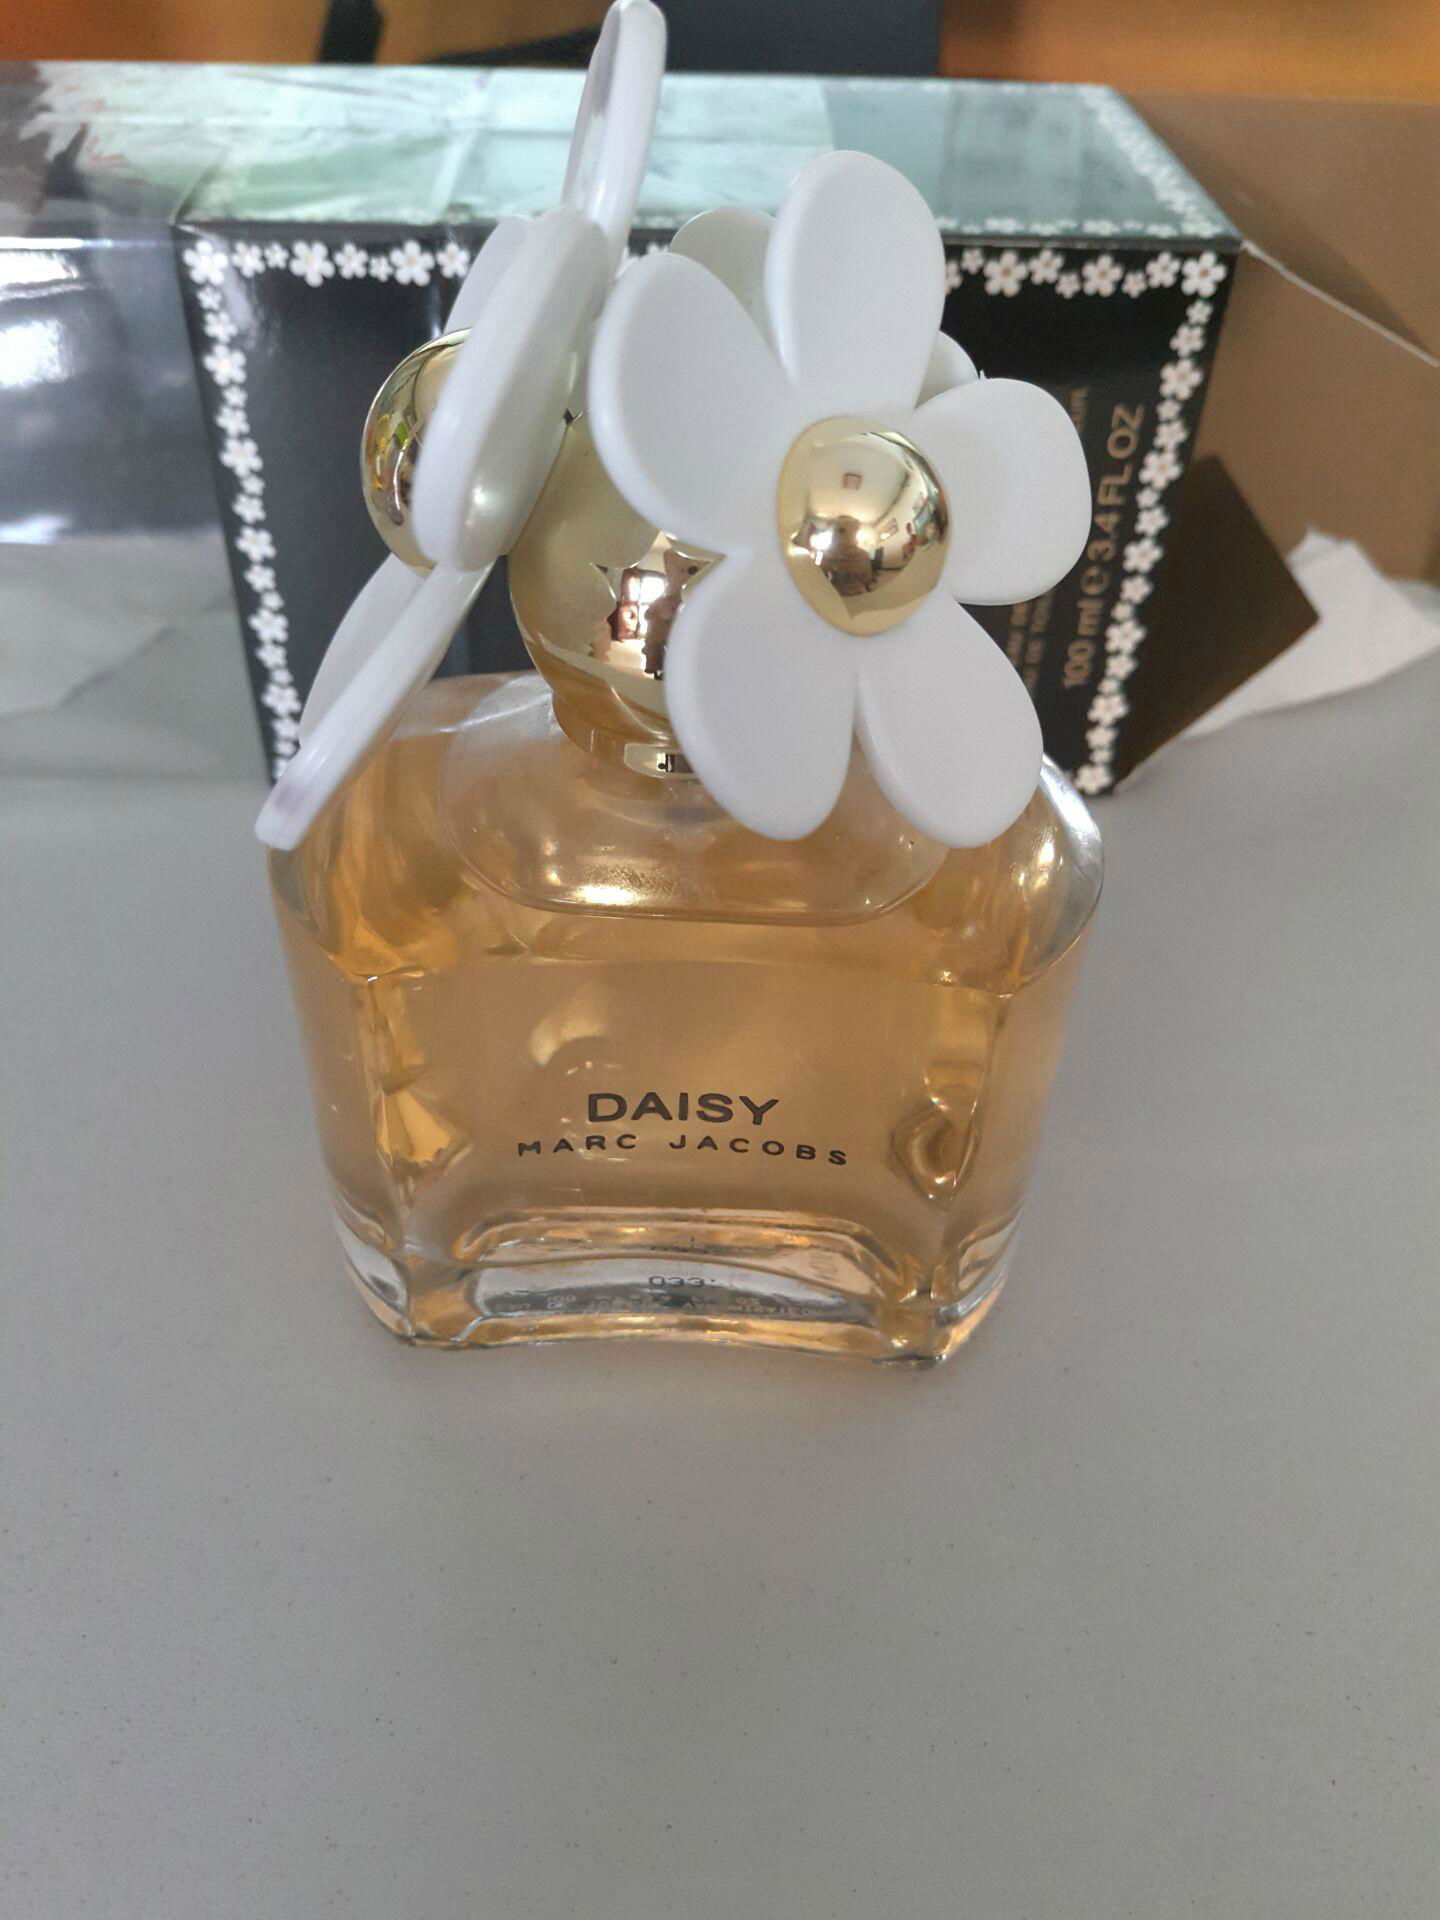 Good smell lady MARC JACOBS Daisy perfume - mt725 (China Trading ...